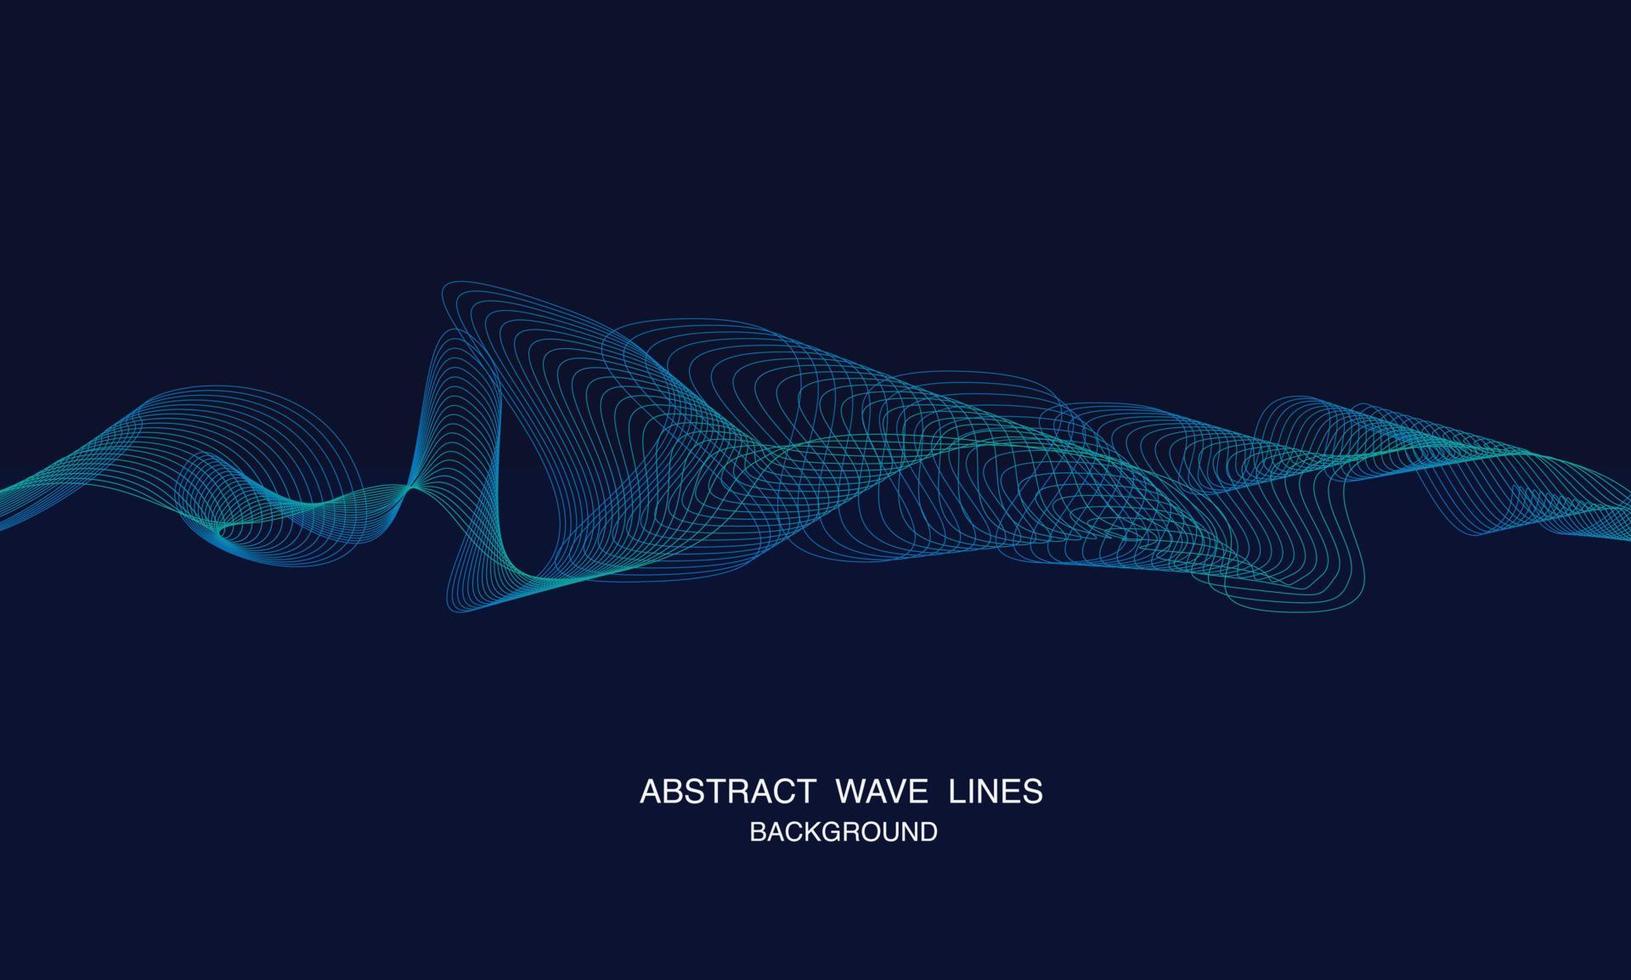 Abstract wave element for digital frequency equalizer design vector background with lines created using smooth curves wavy lines blending tool.